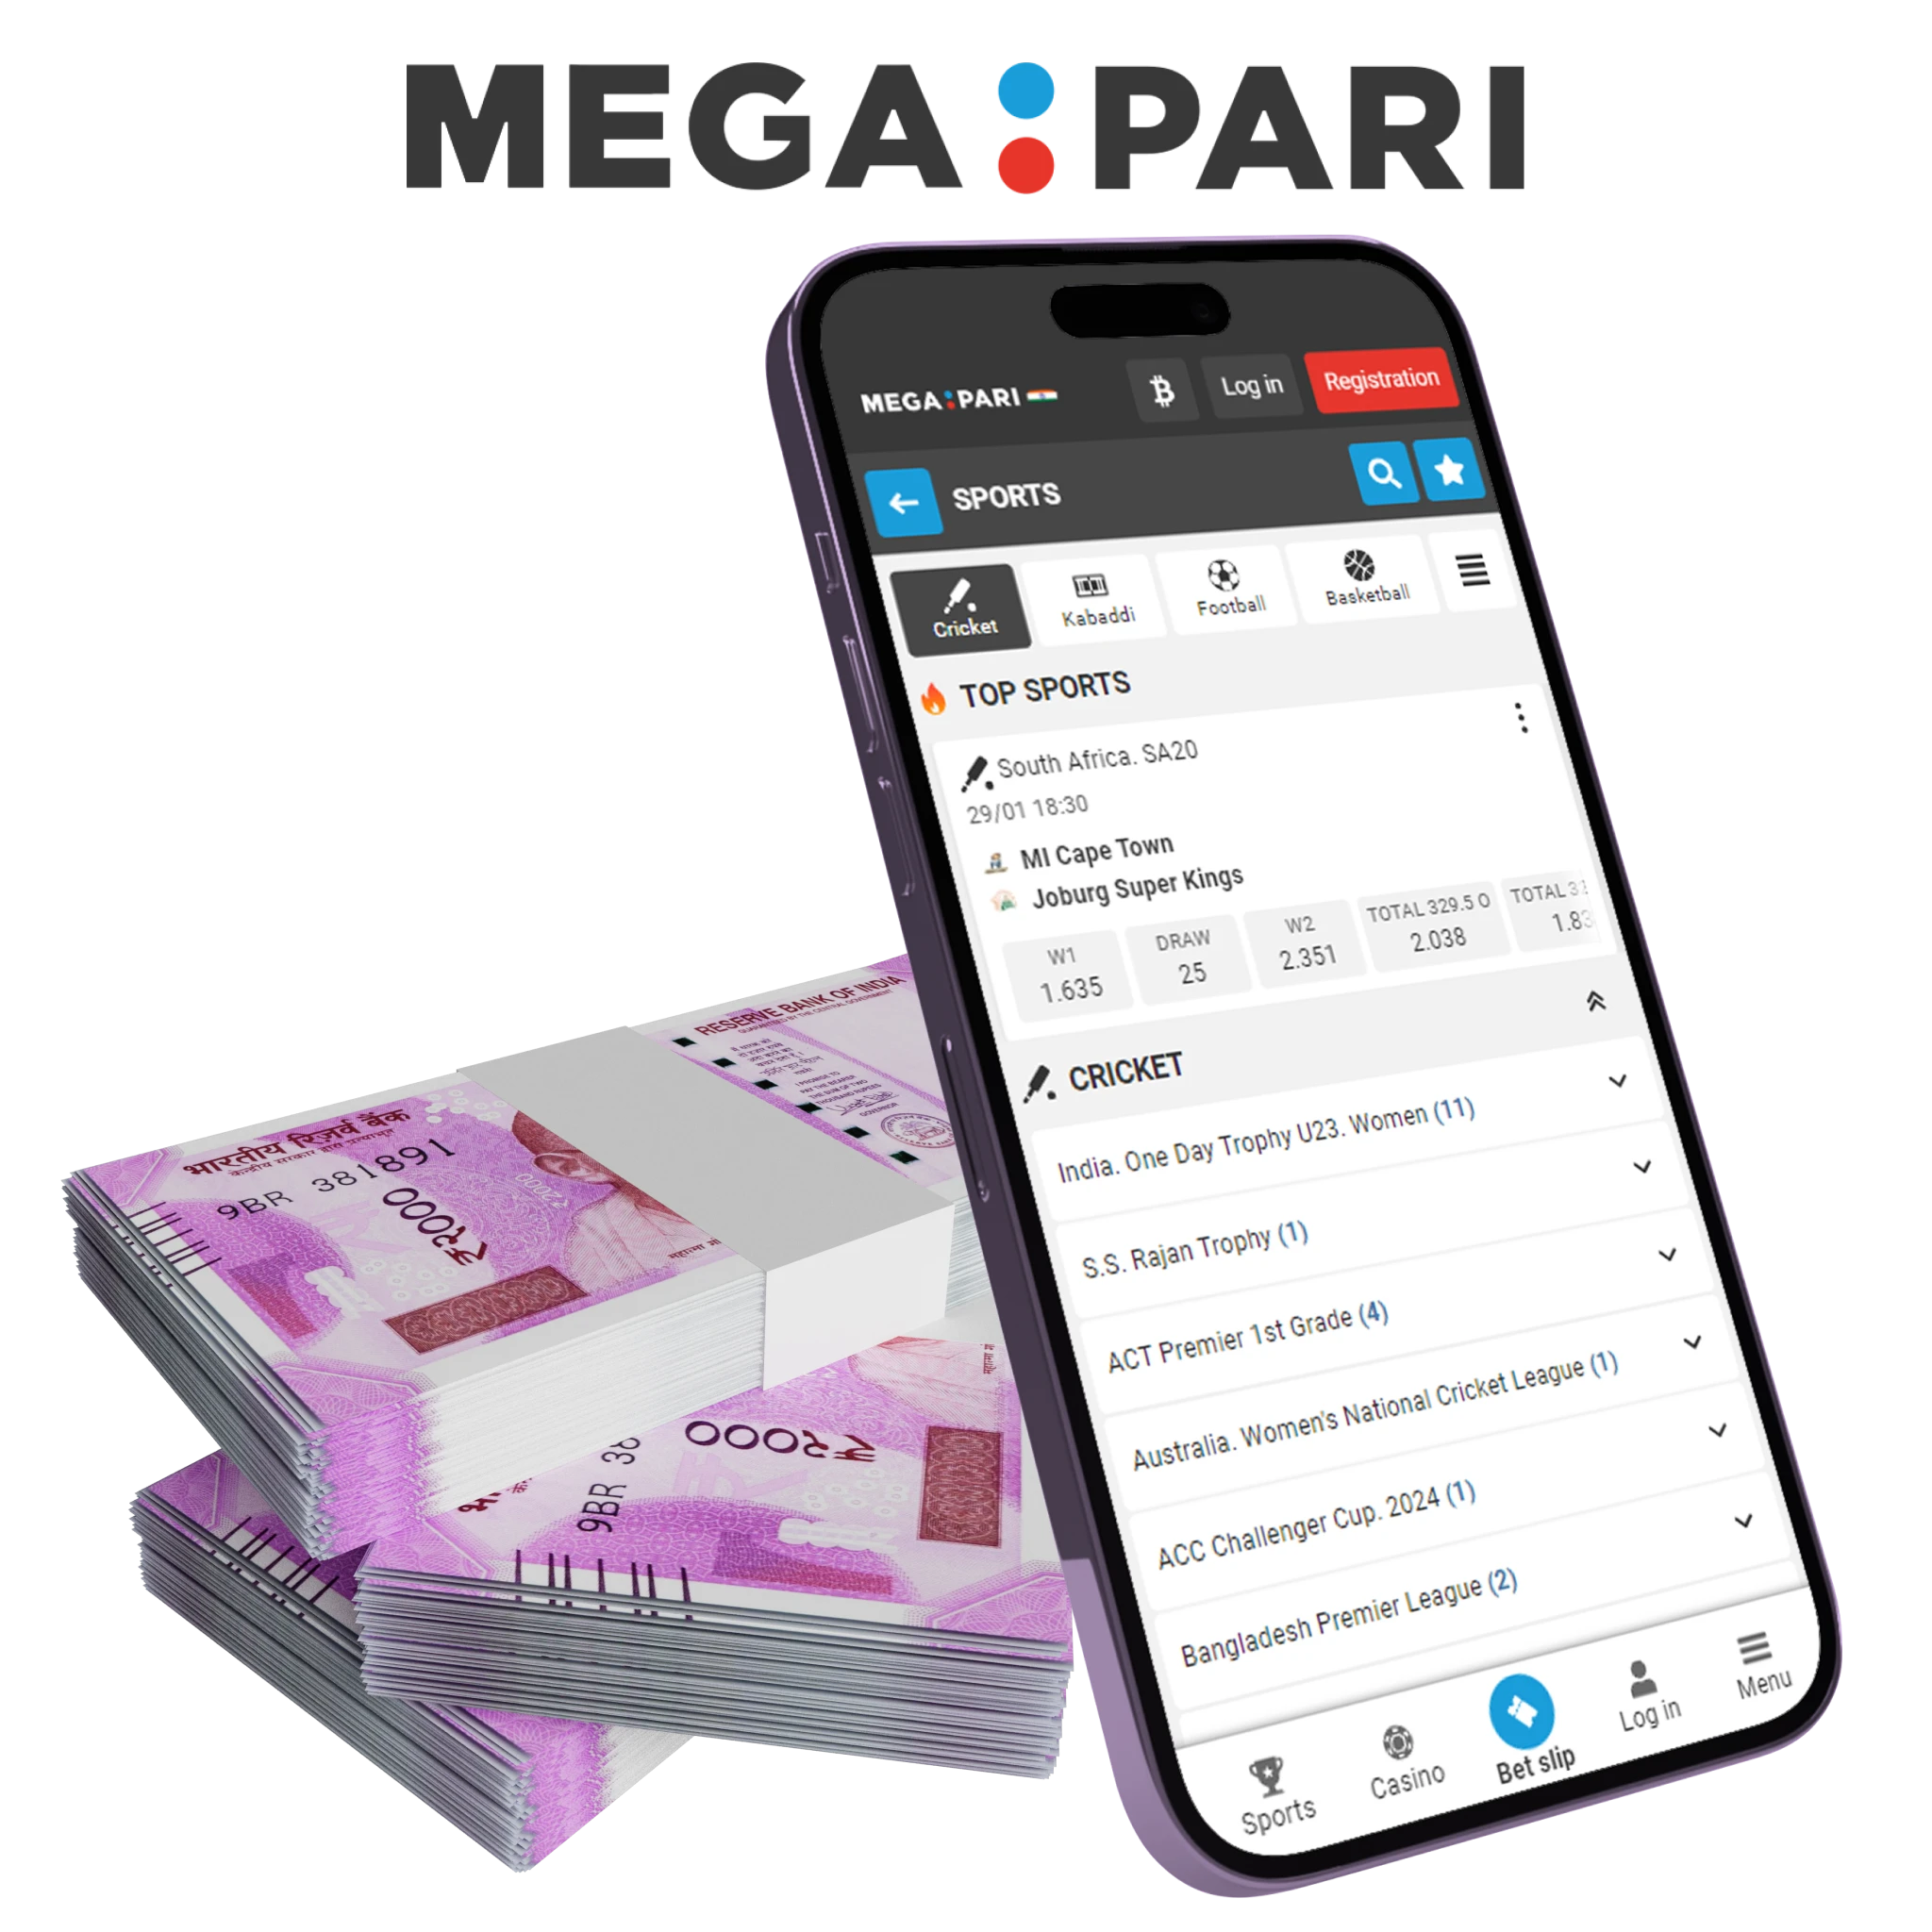 Megapari mobile app is popular among Indian users for cricket betting with real money.